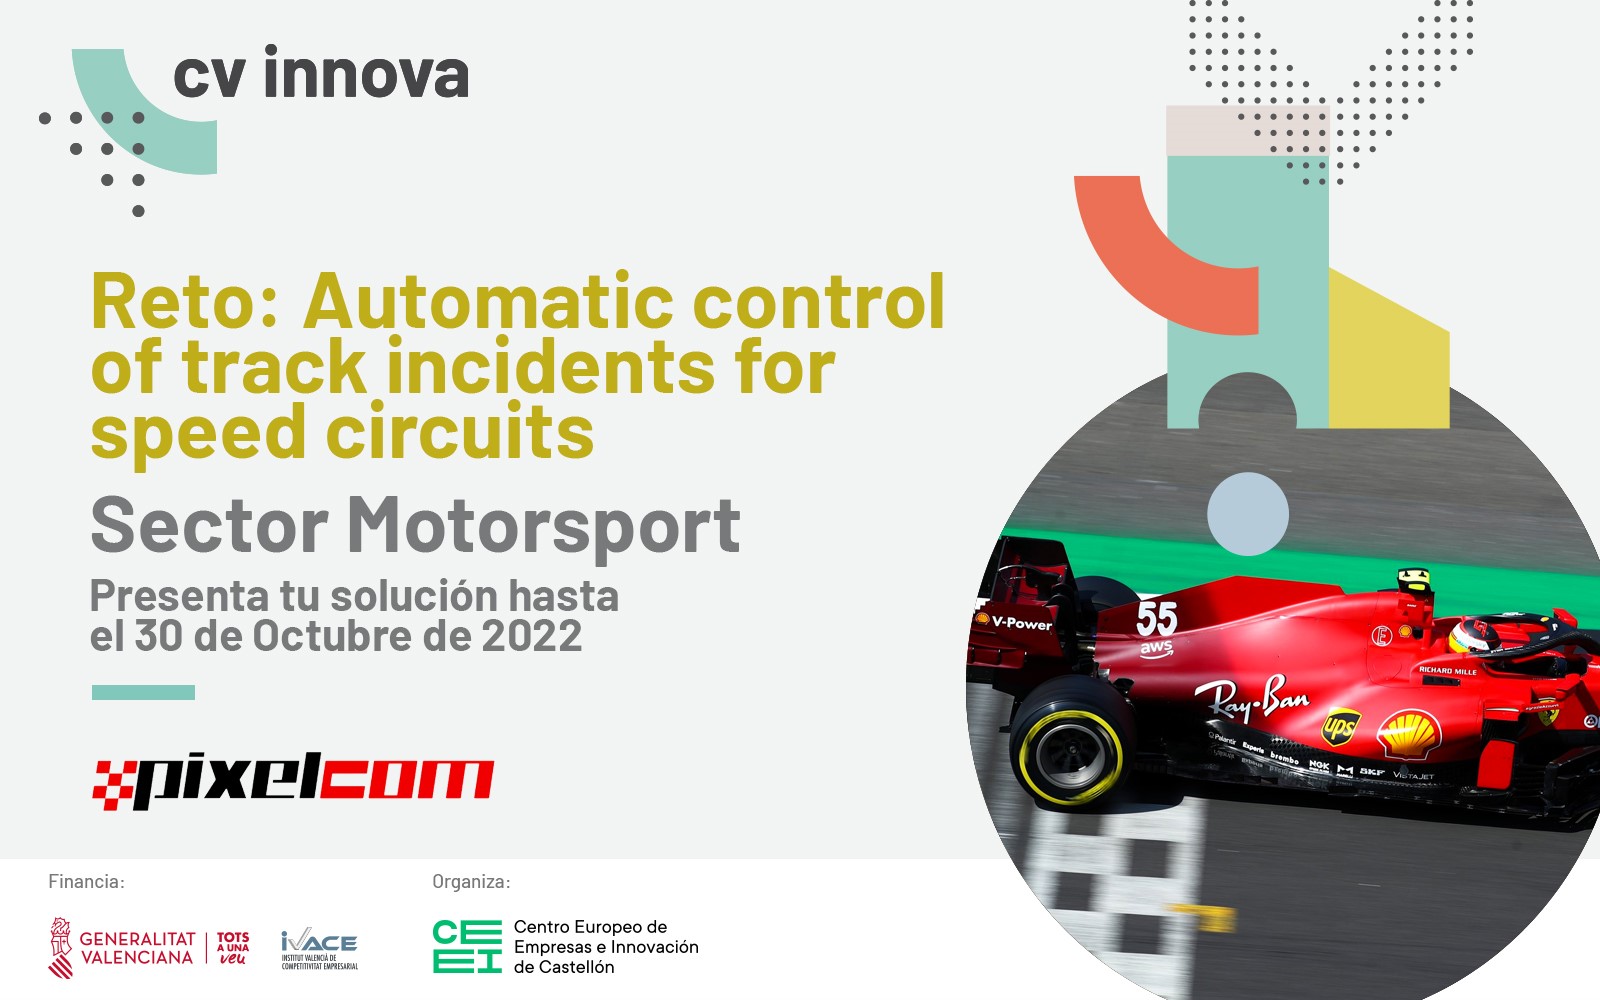 Reto: Automatic control of track incidents for speed circuits